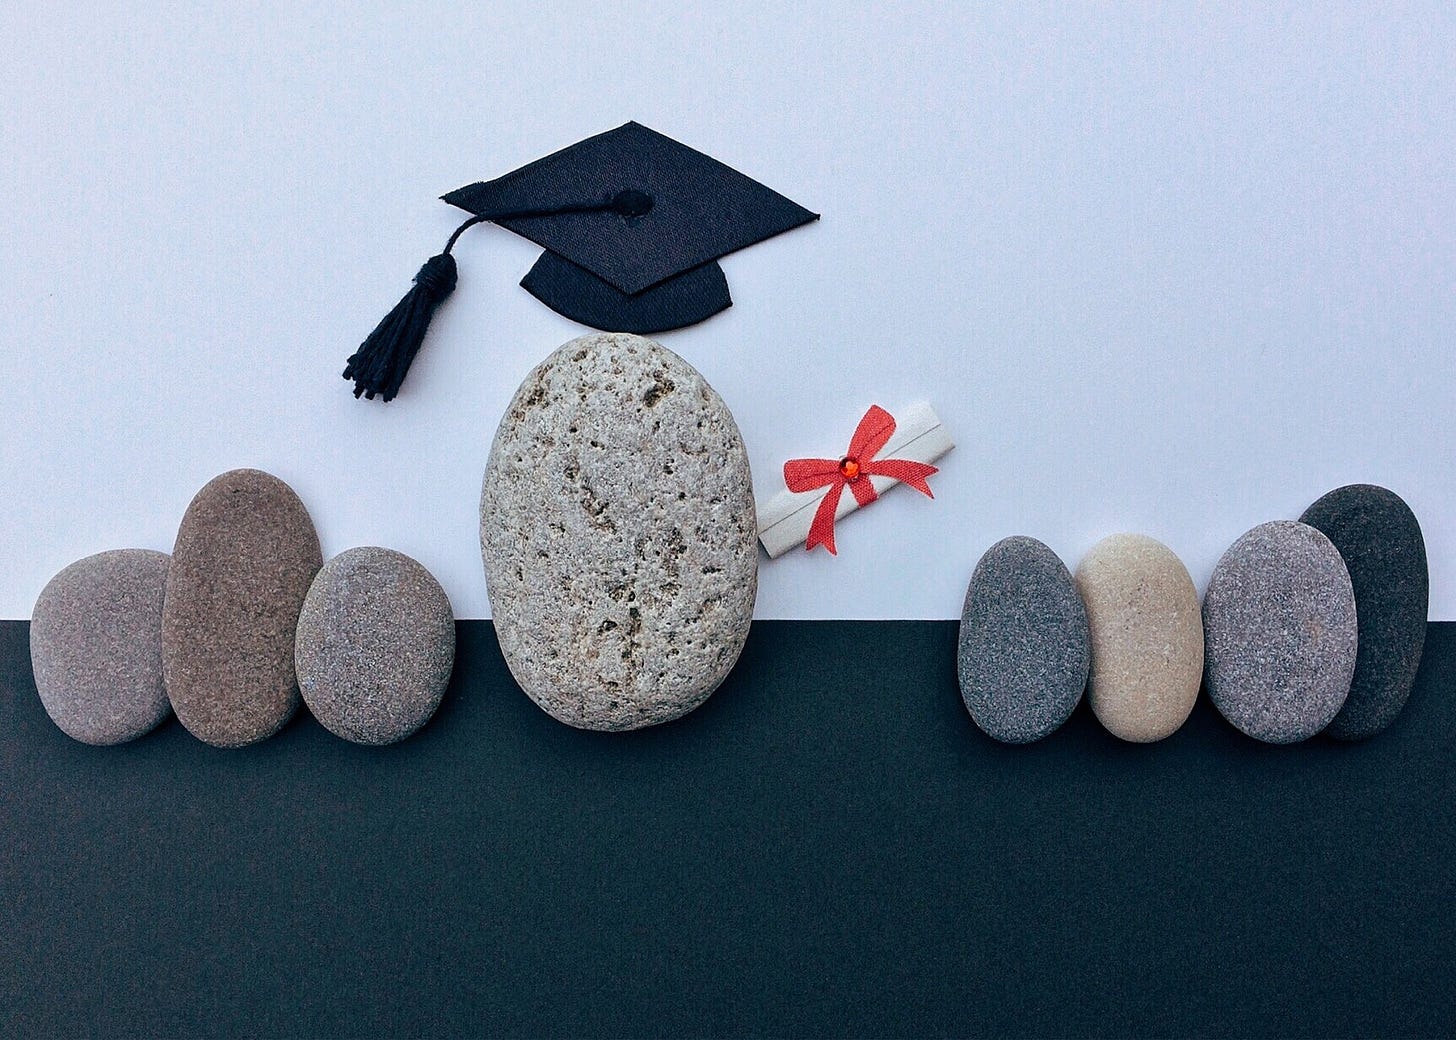 group of 8 small stones, one wearing a mortarboard and carrying a diploma